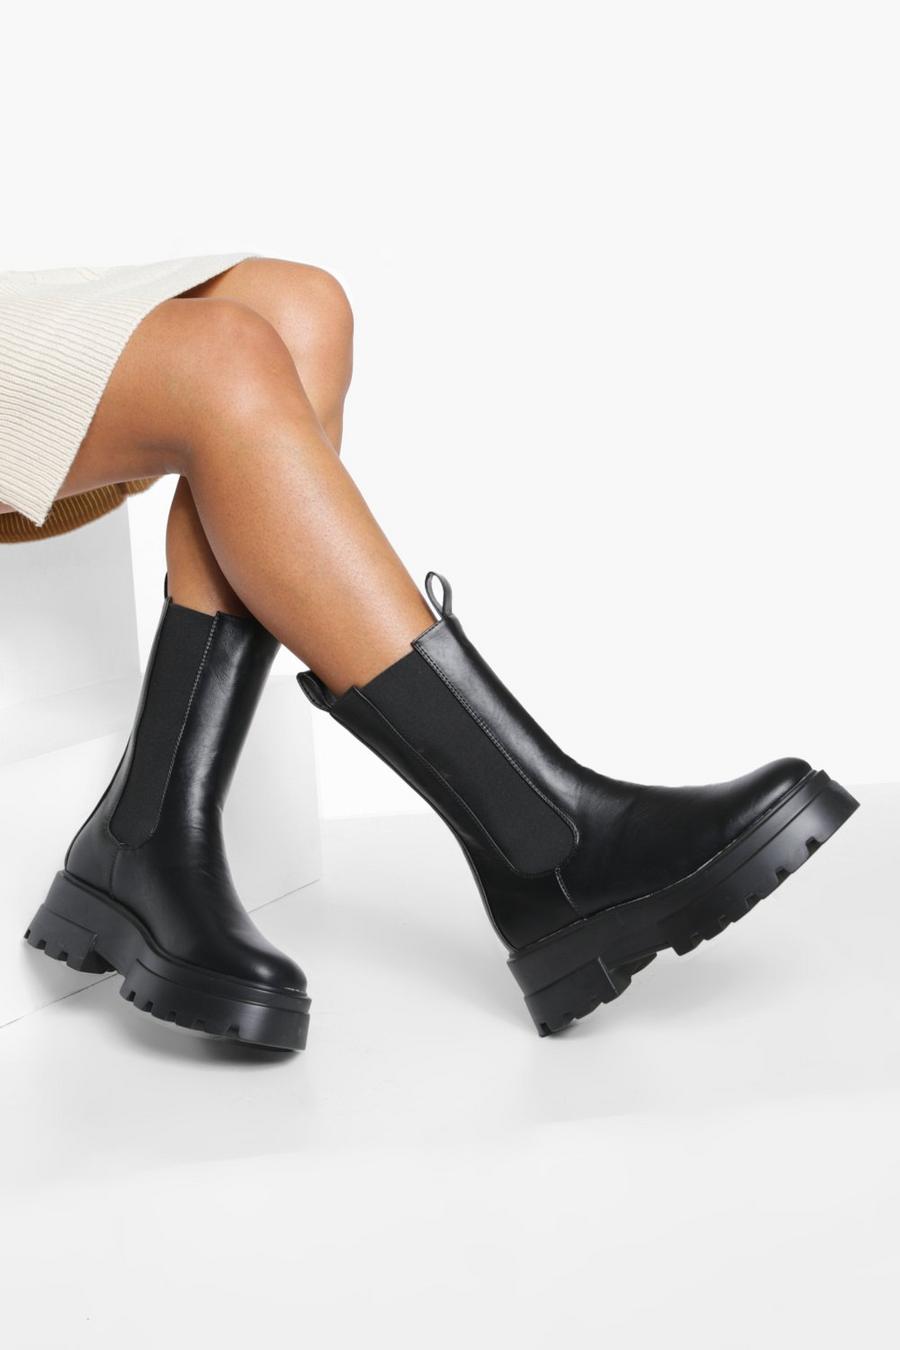 Black Wide Fit Cleated Sole Calf High Chelsea Boots image number 1